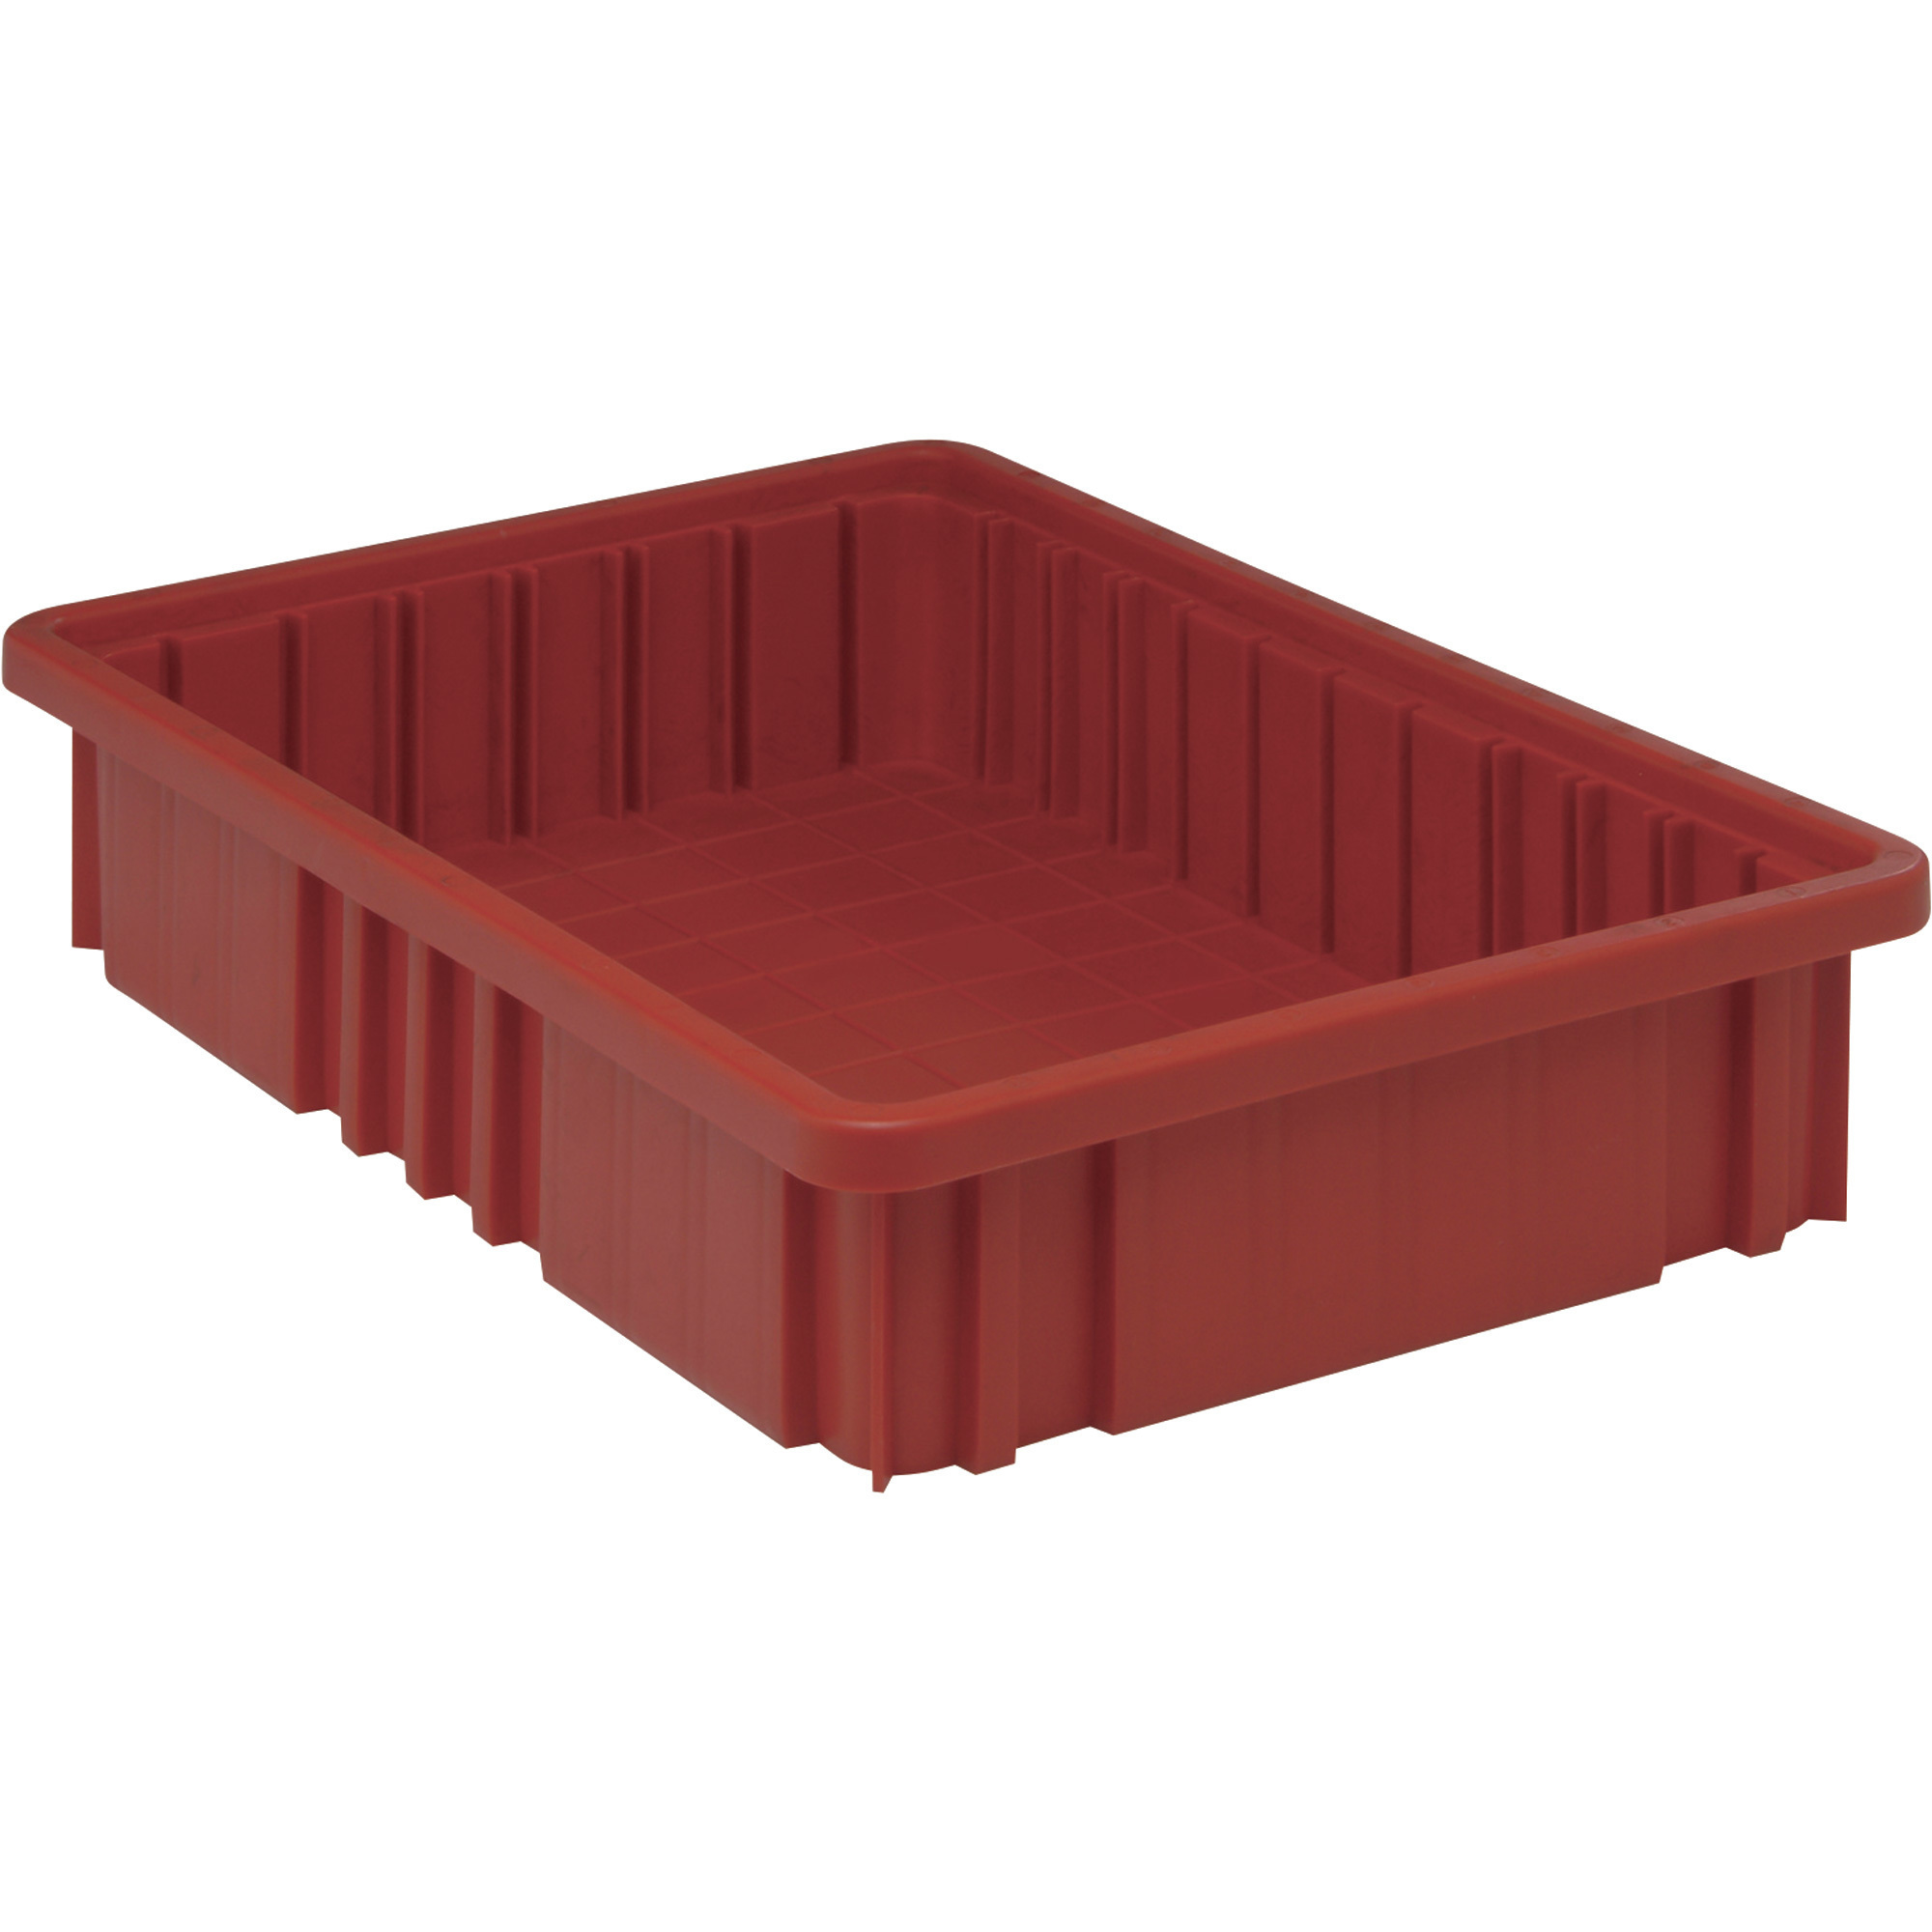 Storage Dividable Grid Container — 12-Pack, 16 1/2Inch L x 10 7/8Inch W x 3 1/2Inch H, Red, Model - Quantum DG92035RD